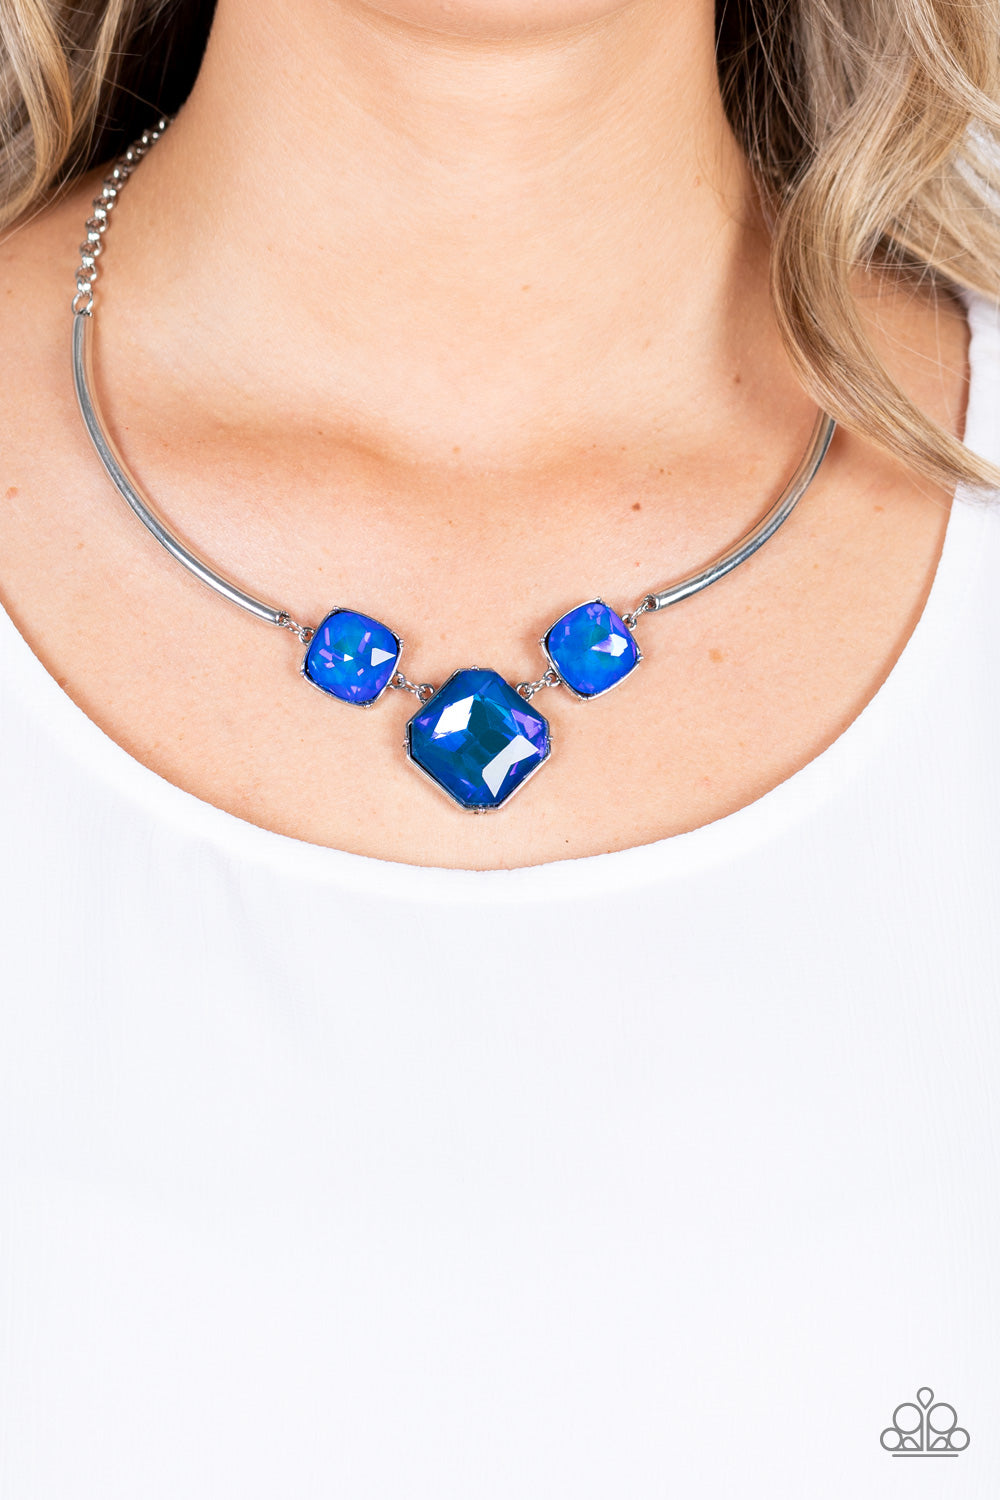 Paparazzi Divine IRIDESCENCE Blue Short Necklace - Life Of The Party Exclusive October 2020